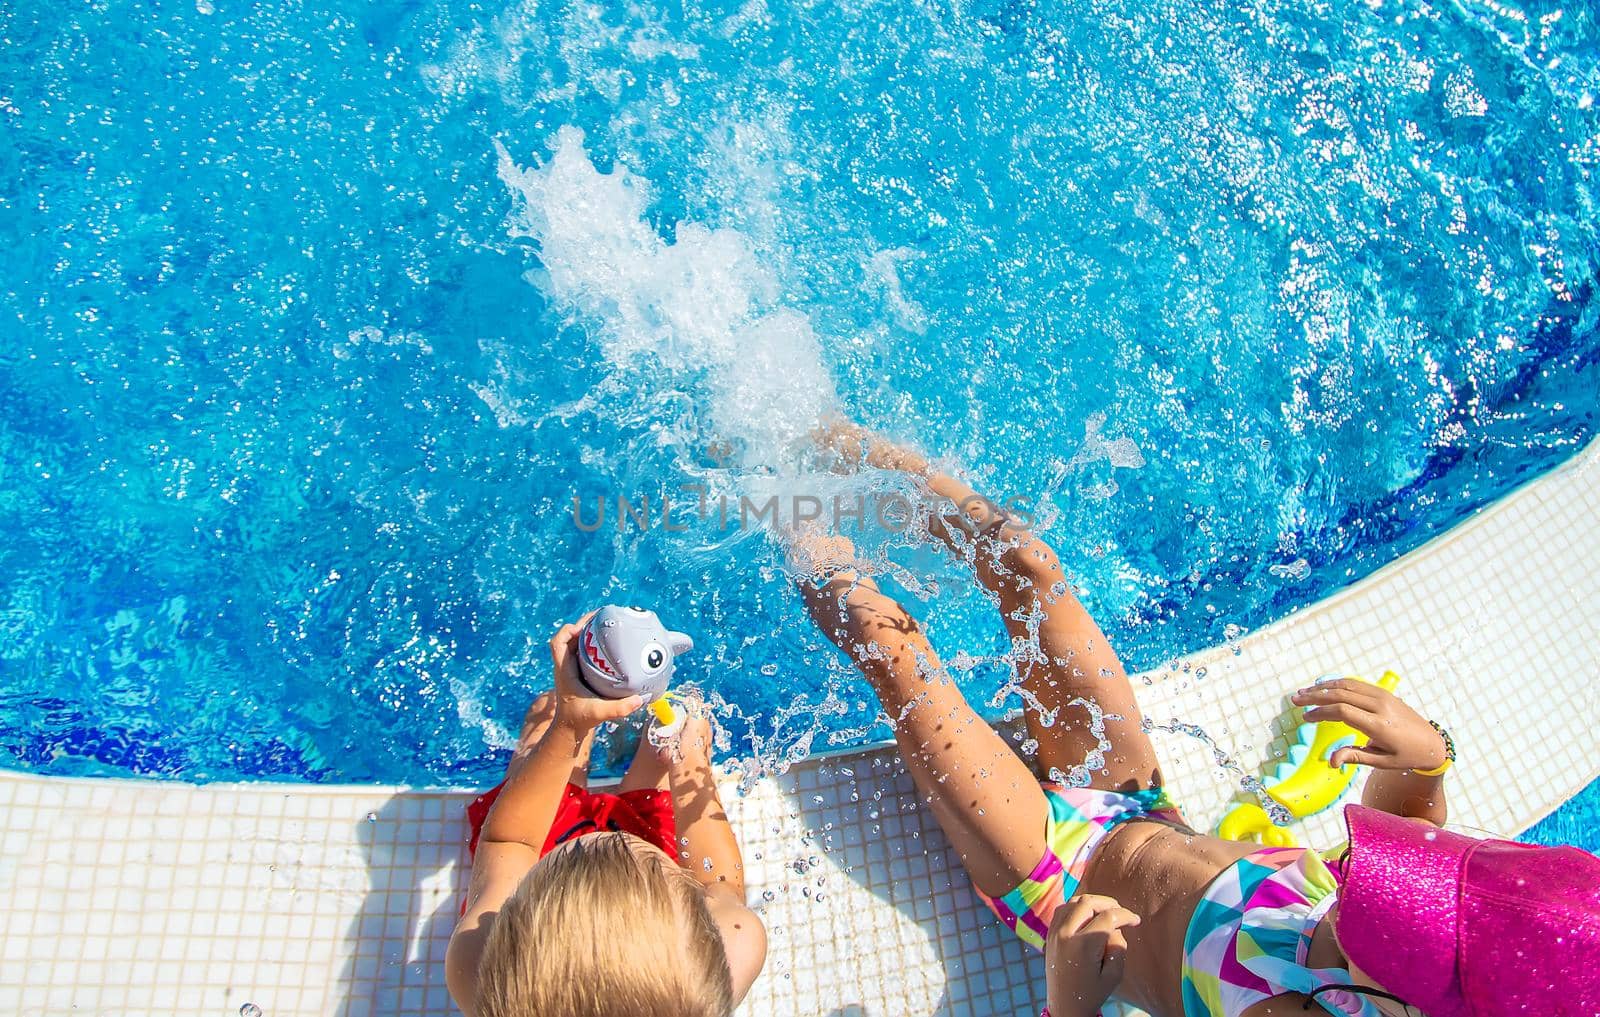 Children splash water with their feet in the pool. Selective focus. Kids.